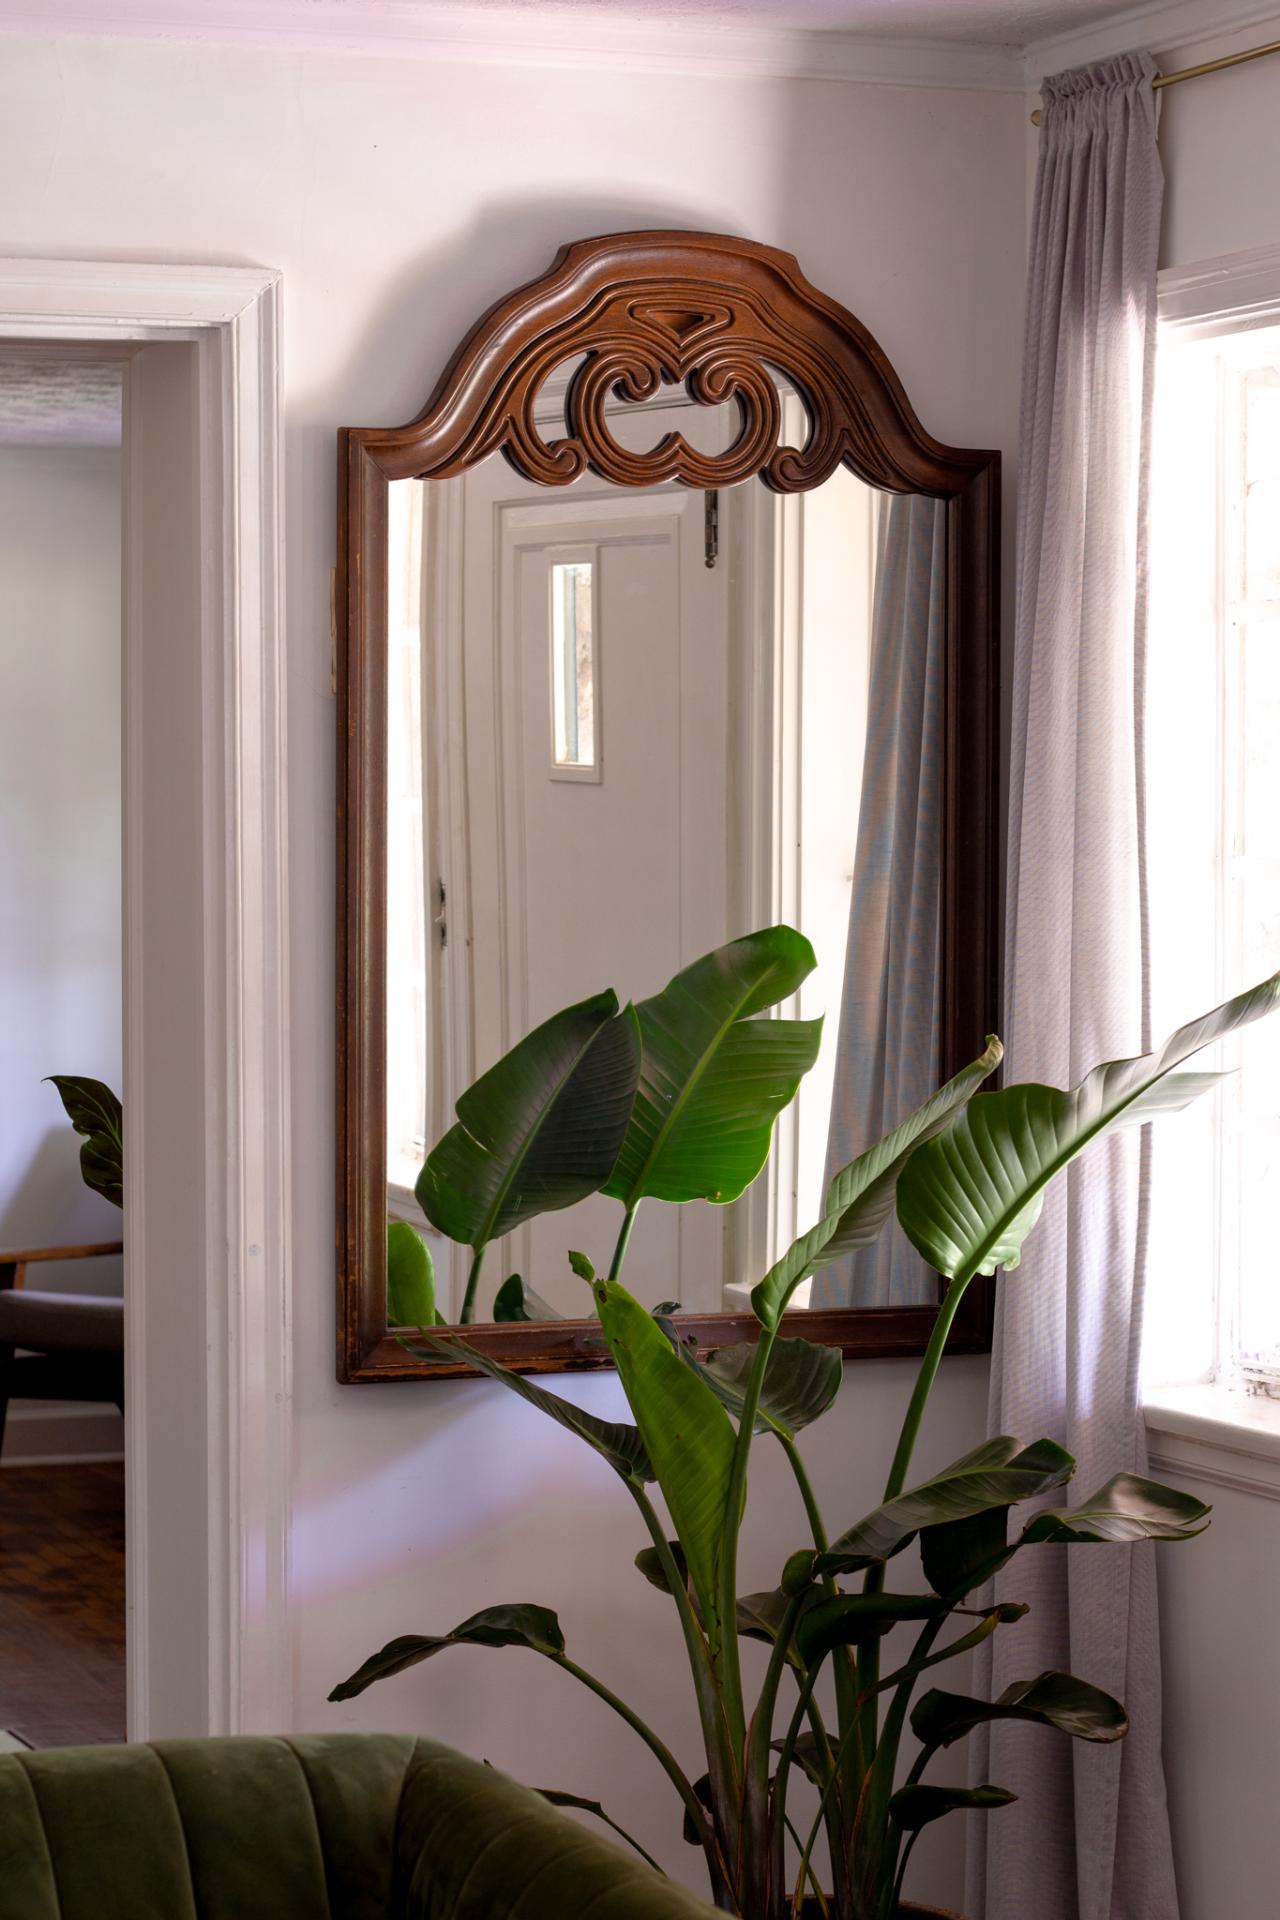 How To Hang A Heavy Mirror With, How To Hang Heavy Mirror On Sheetrock